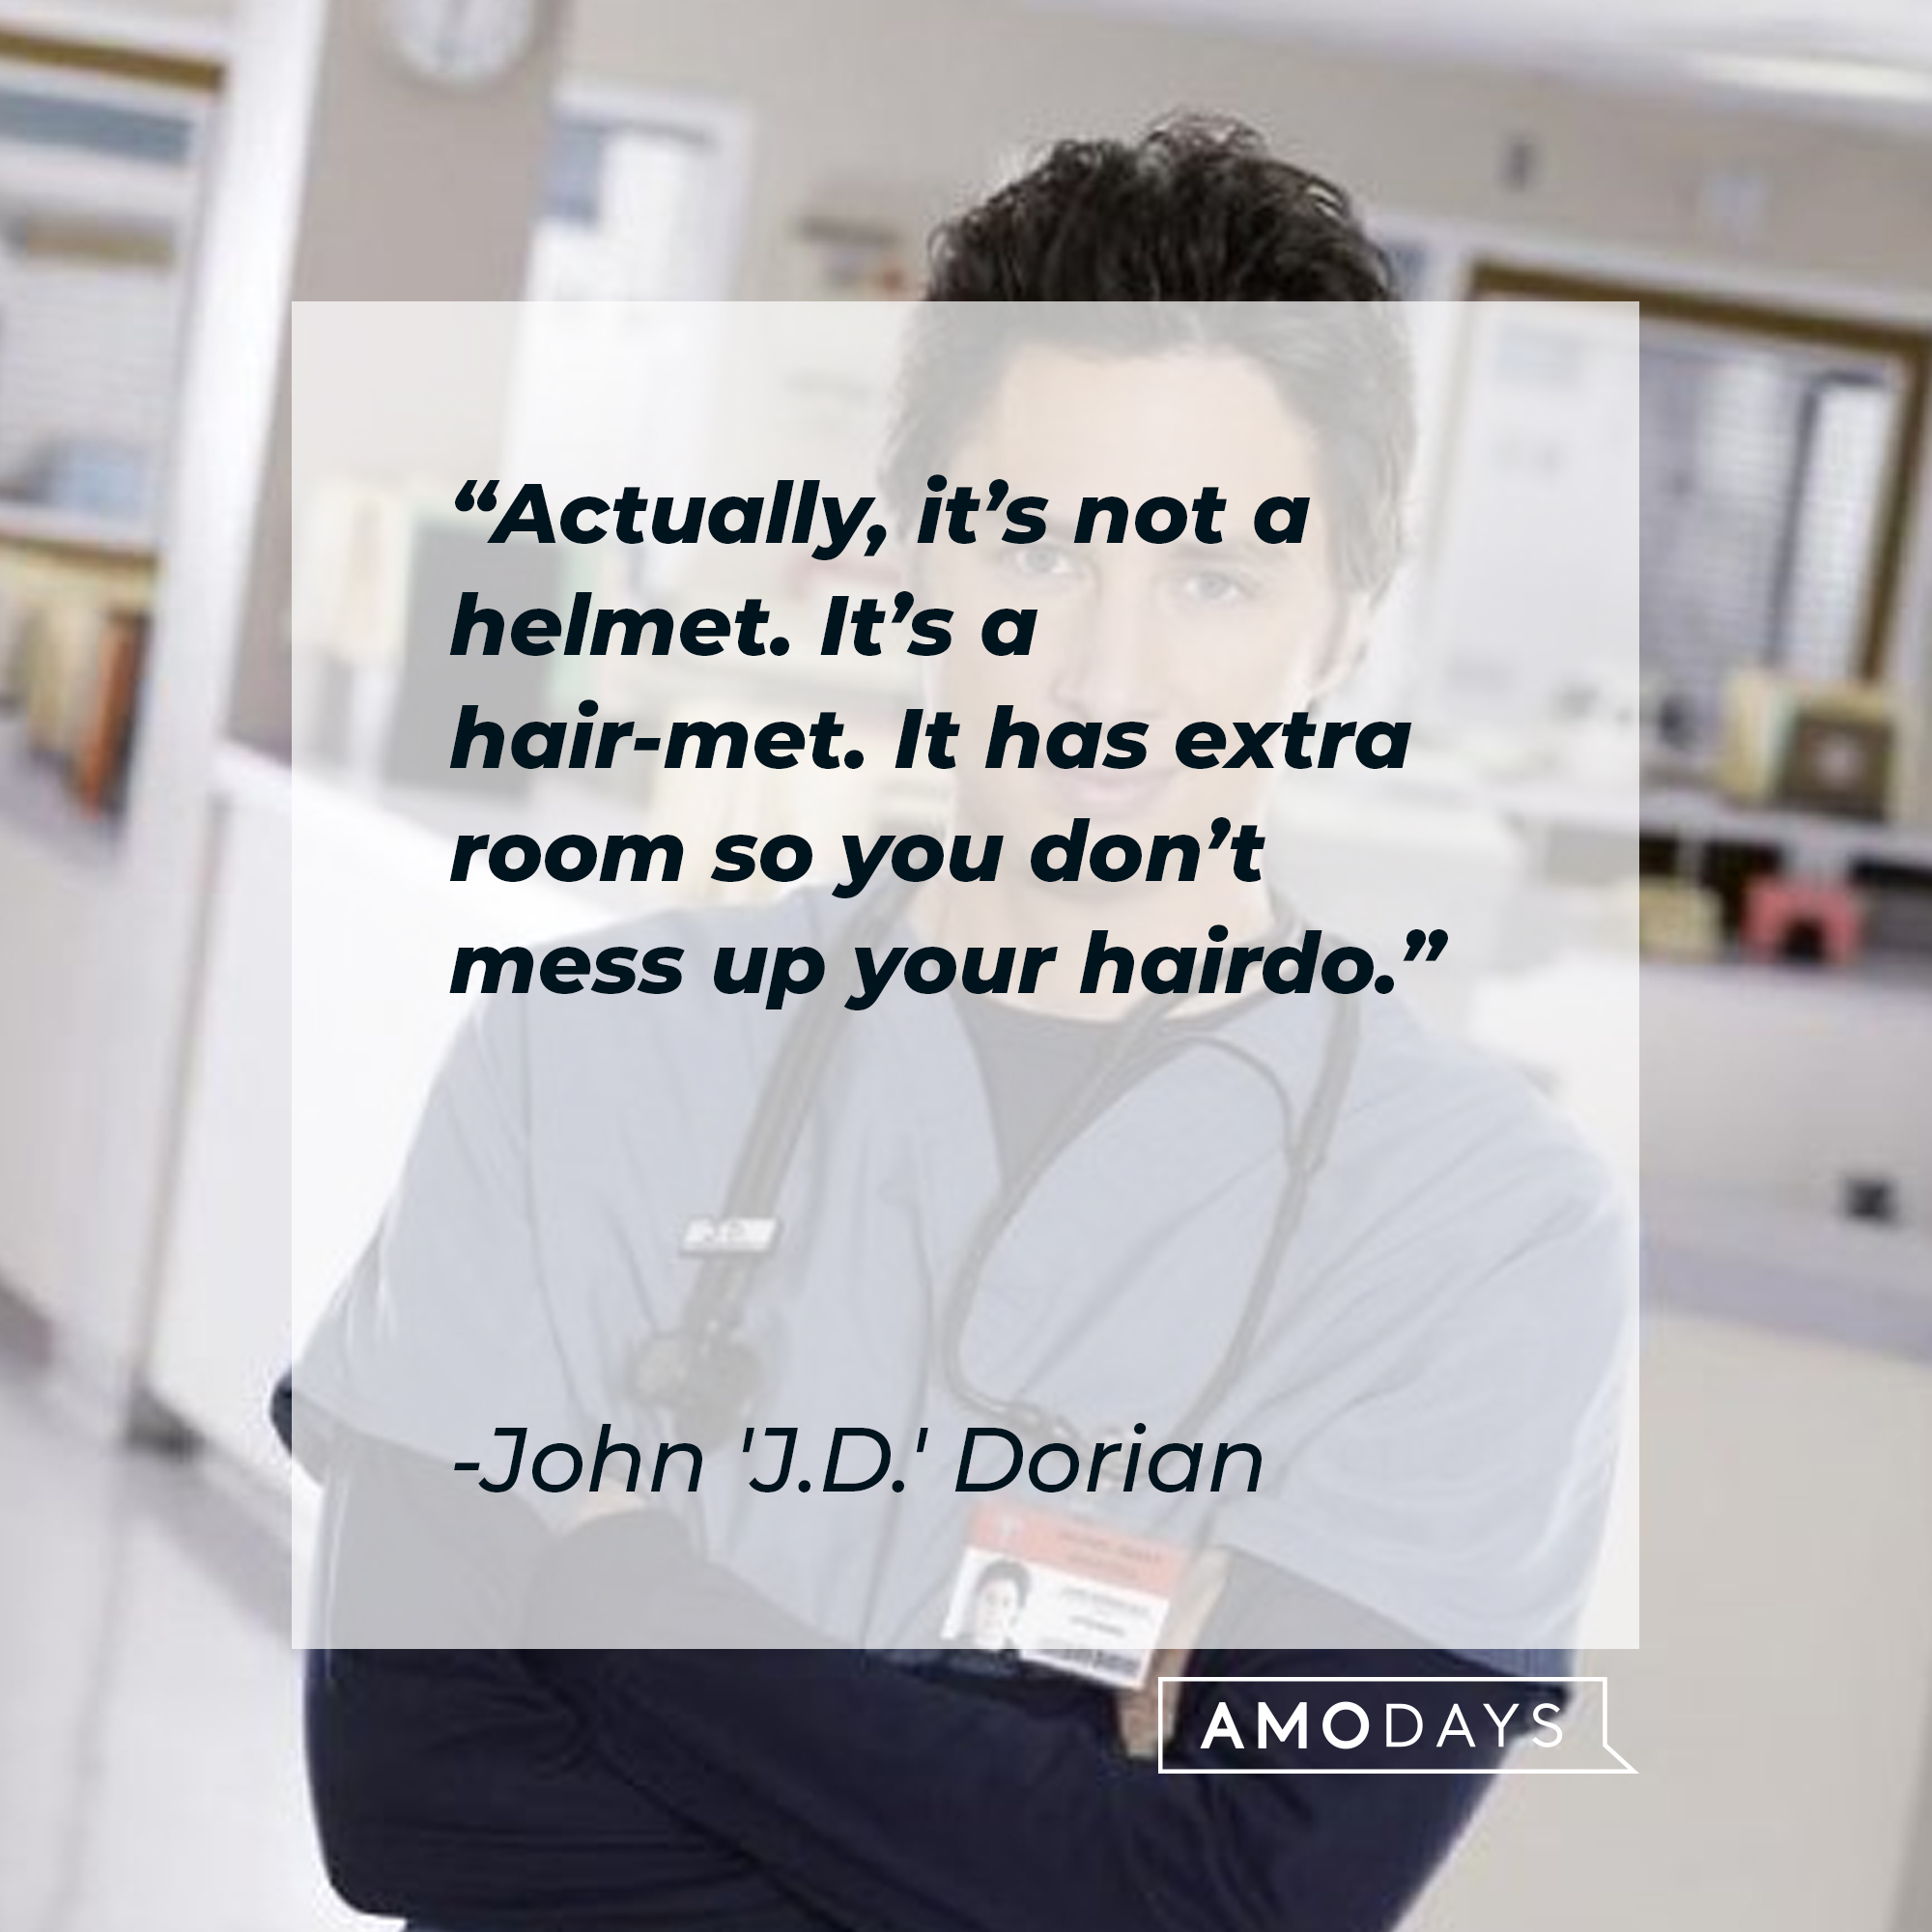 John 'J.D.' Dorian with his quote: “Actually, it’s not a helmet. It’s a hair-met. It has extra room so you don’t mess up your hairdo.” | Source: Facebook.com/scrubs